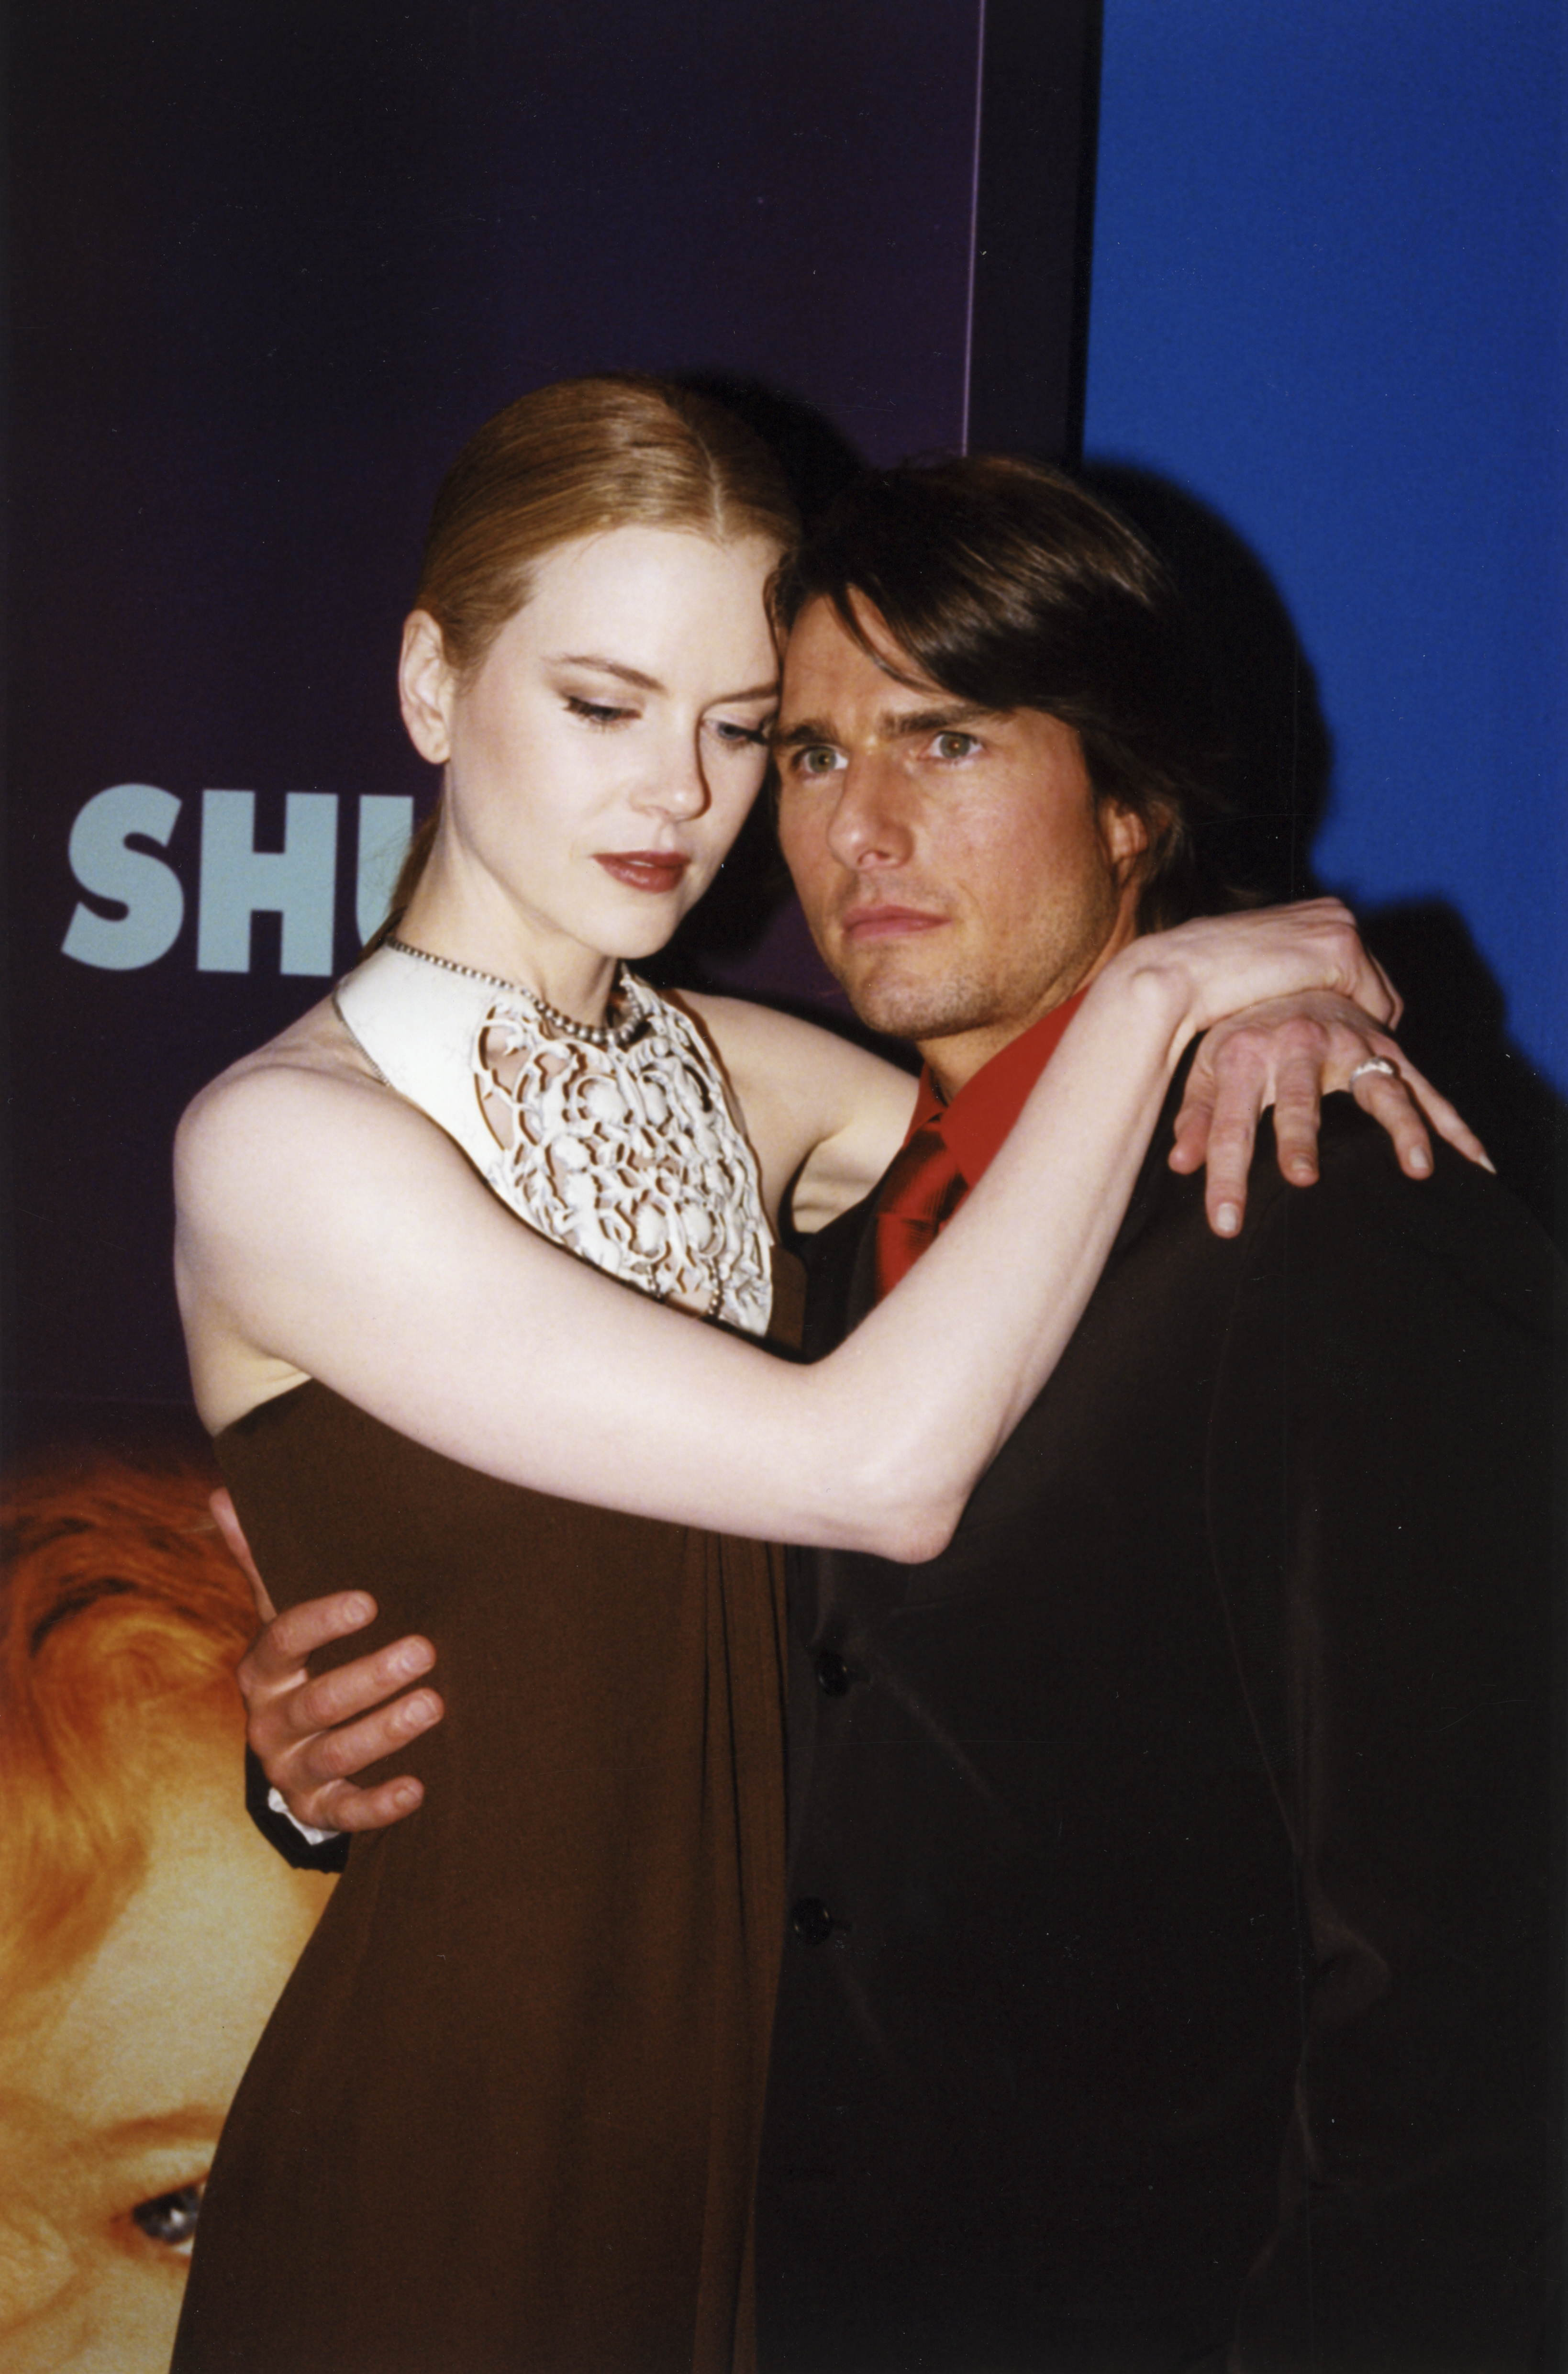 Nicole Kidman and Tom Cruise at the premiere of "Eyes Wide Shut" on September 2, 1999, in Paris, France | Source: Getty Images